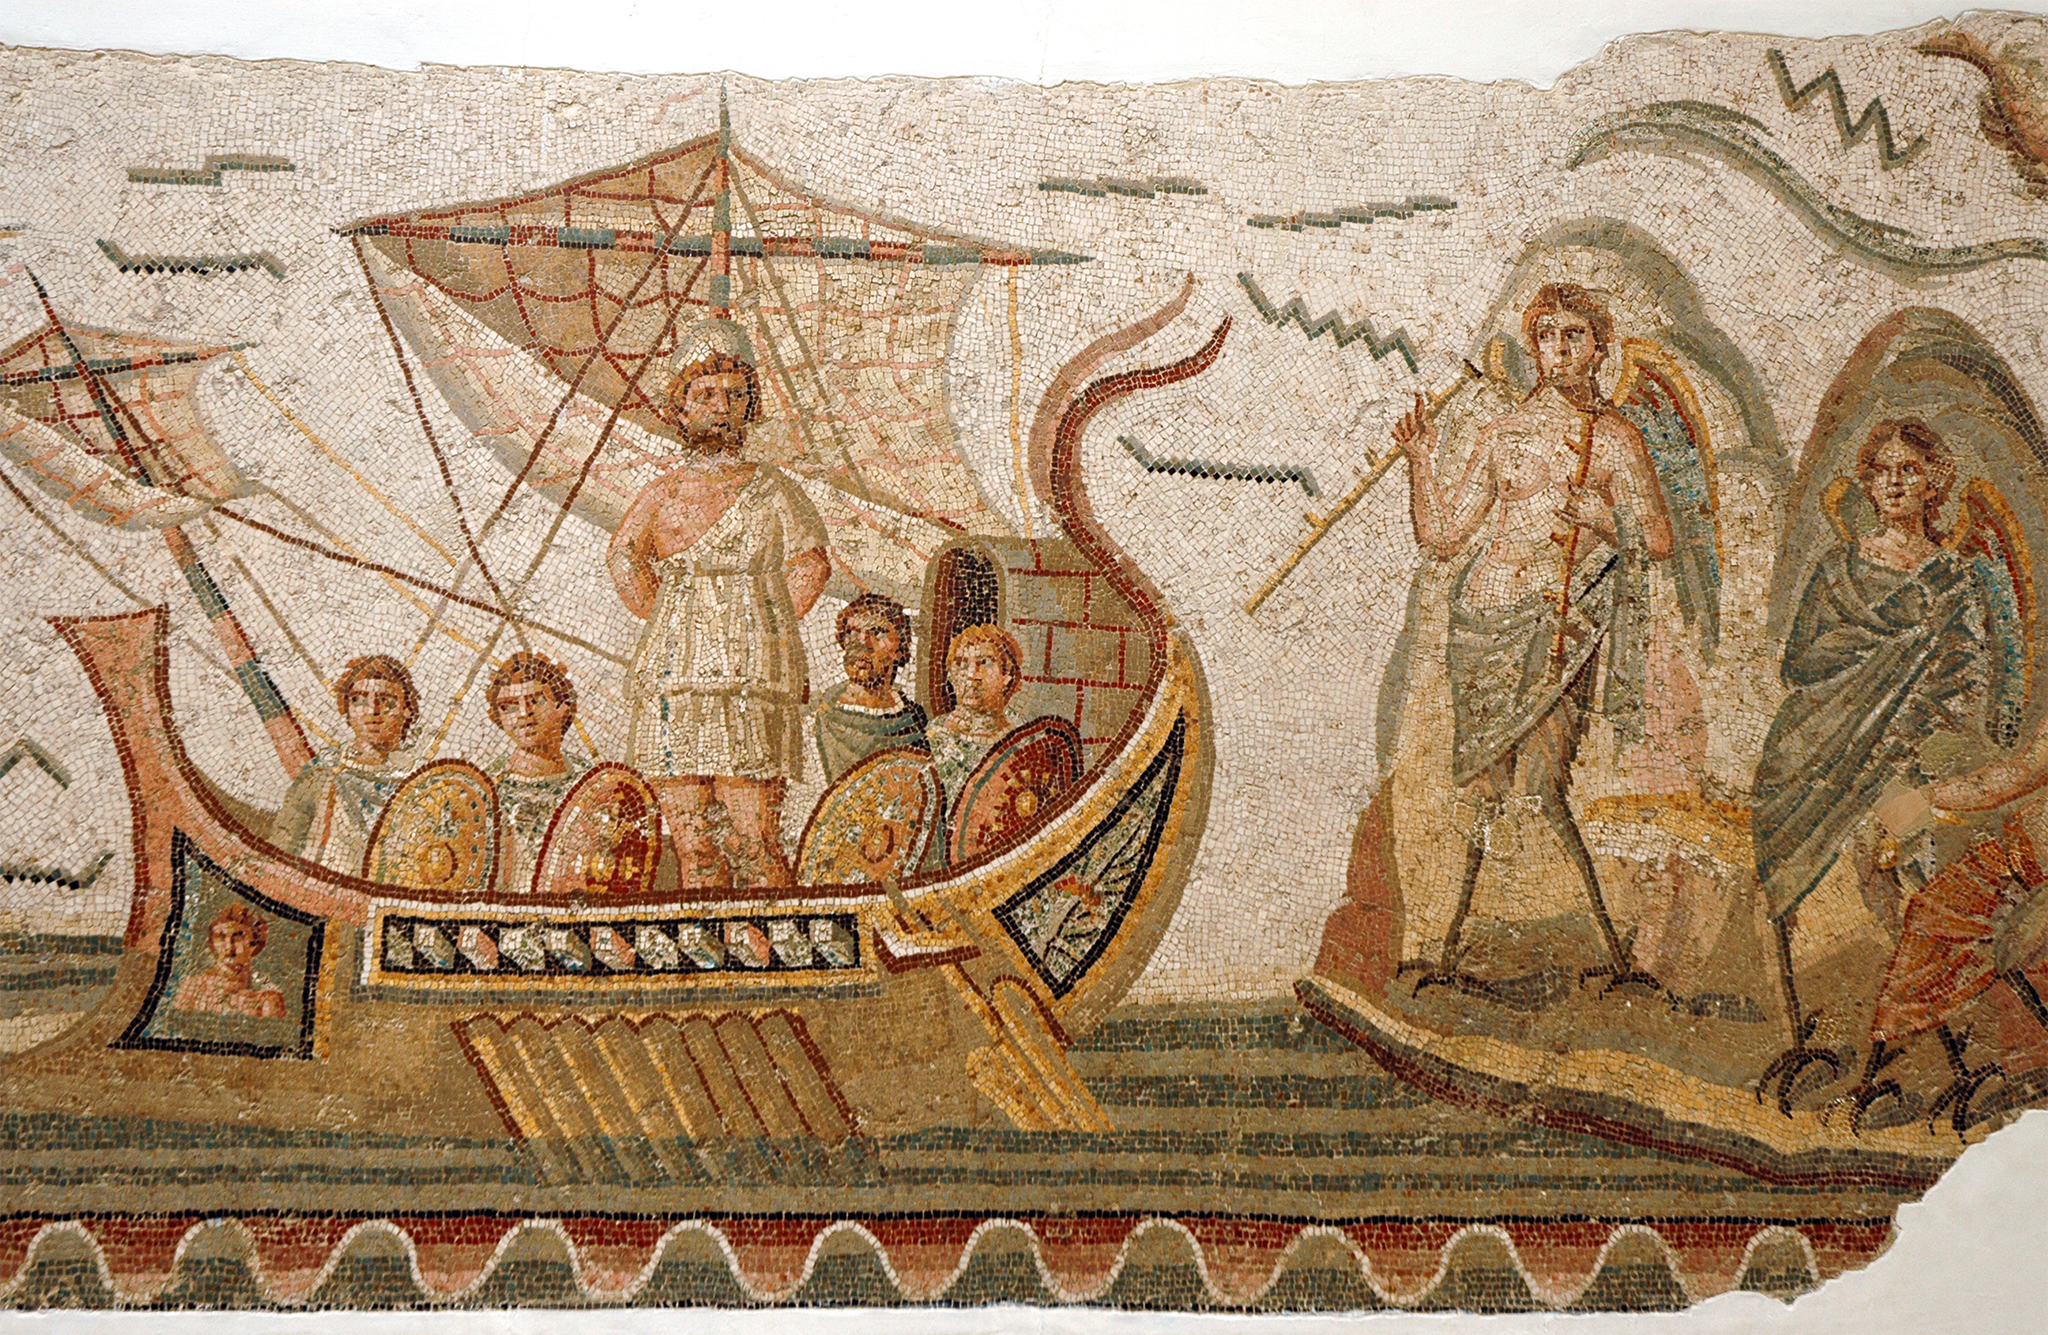 Mosaic scene from Homer's Odyssey, Ulysses meeting with sirens in The Bardo museum in Tunis, capital of Tunisia.